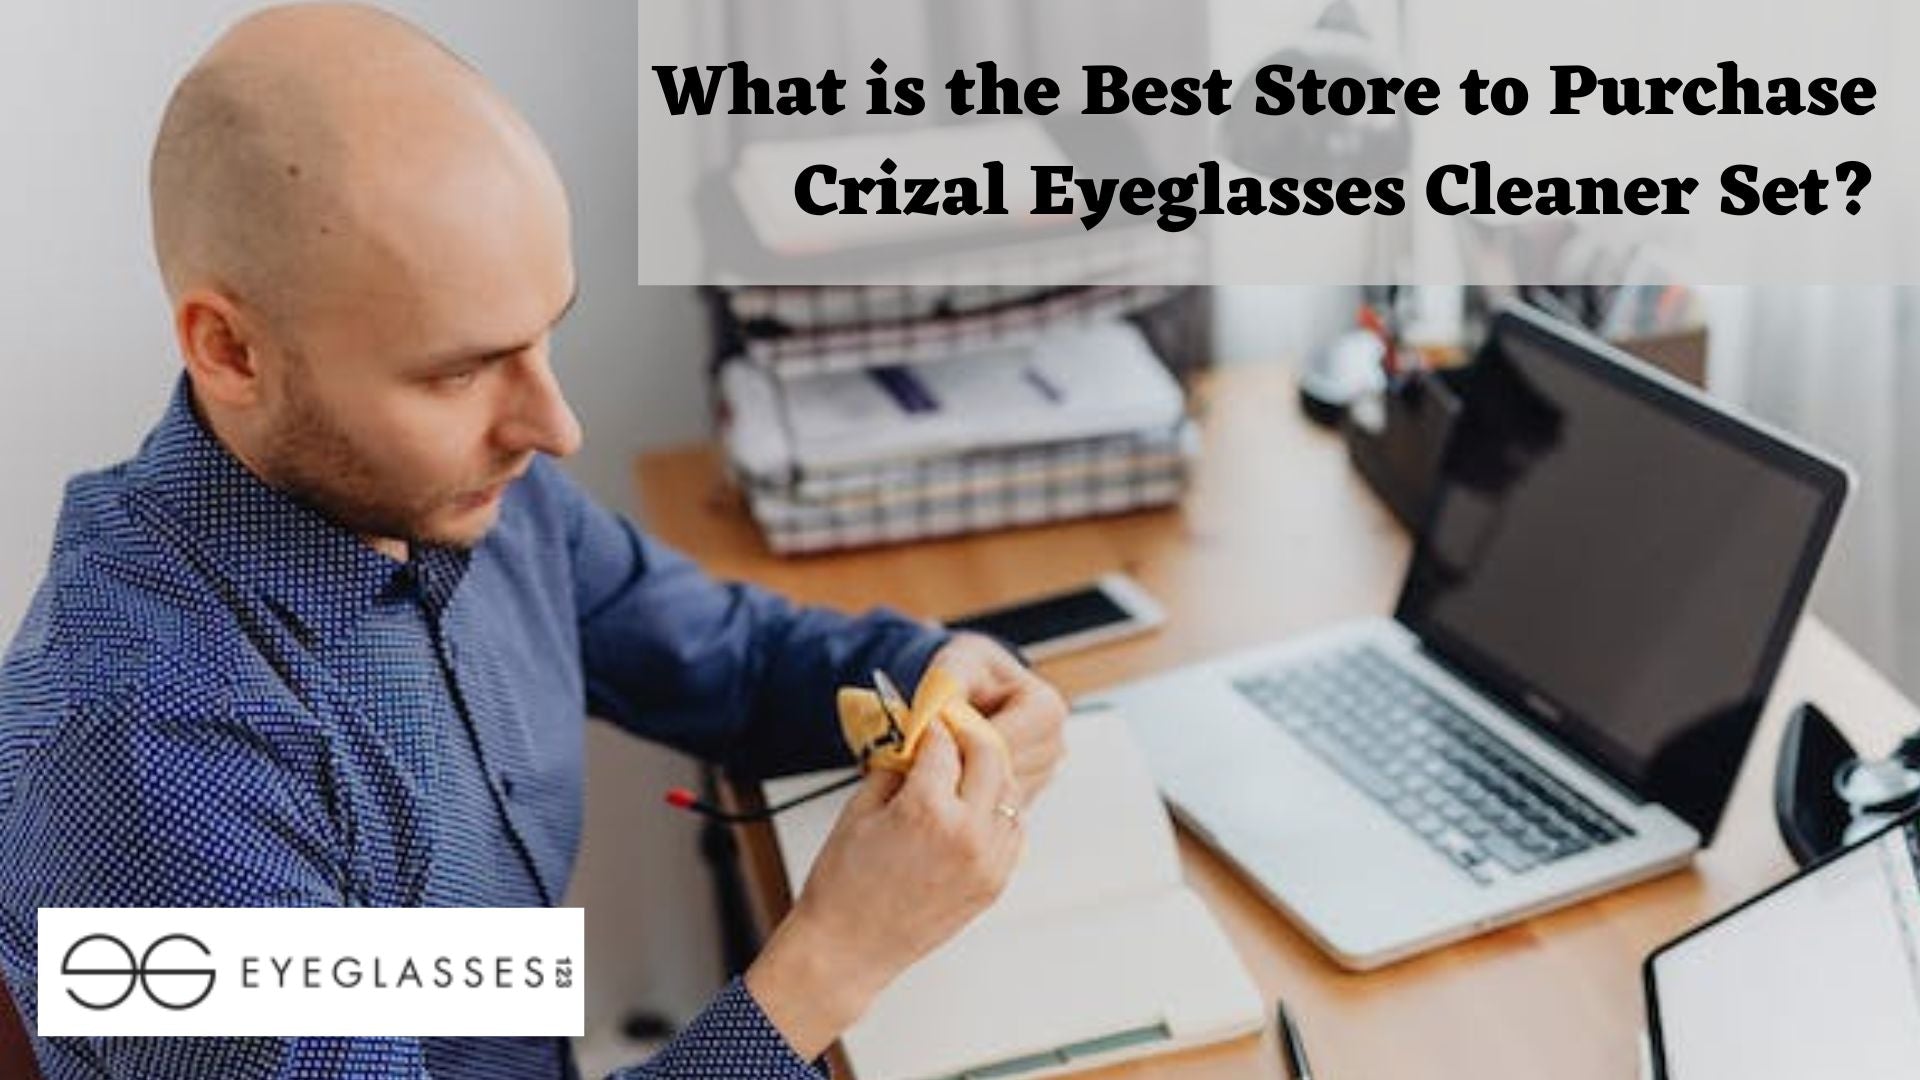 What is the Best Store to Purchase Crizal Eyeglasses Cleaner Set?